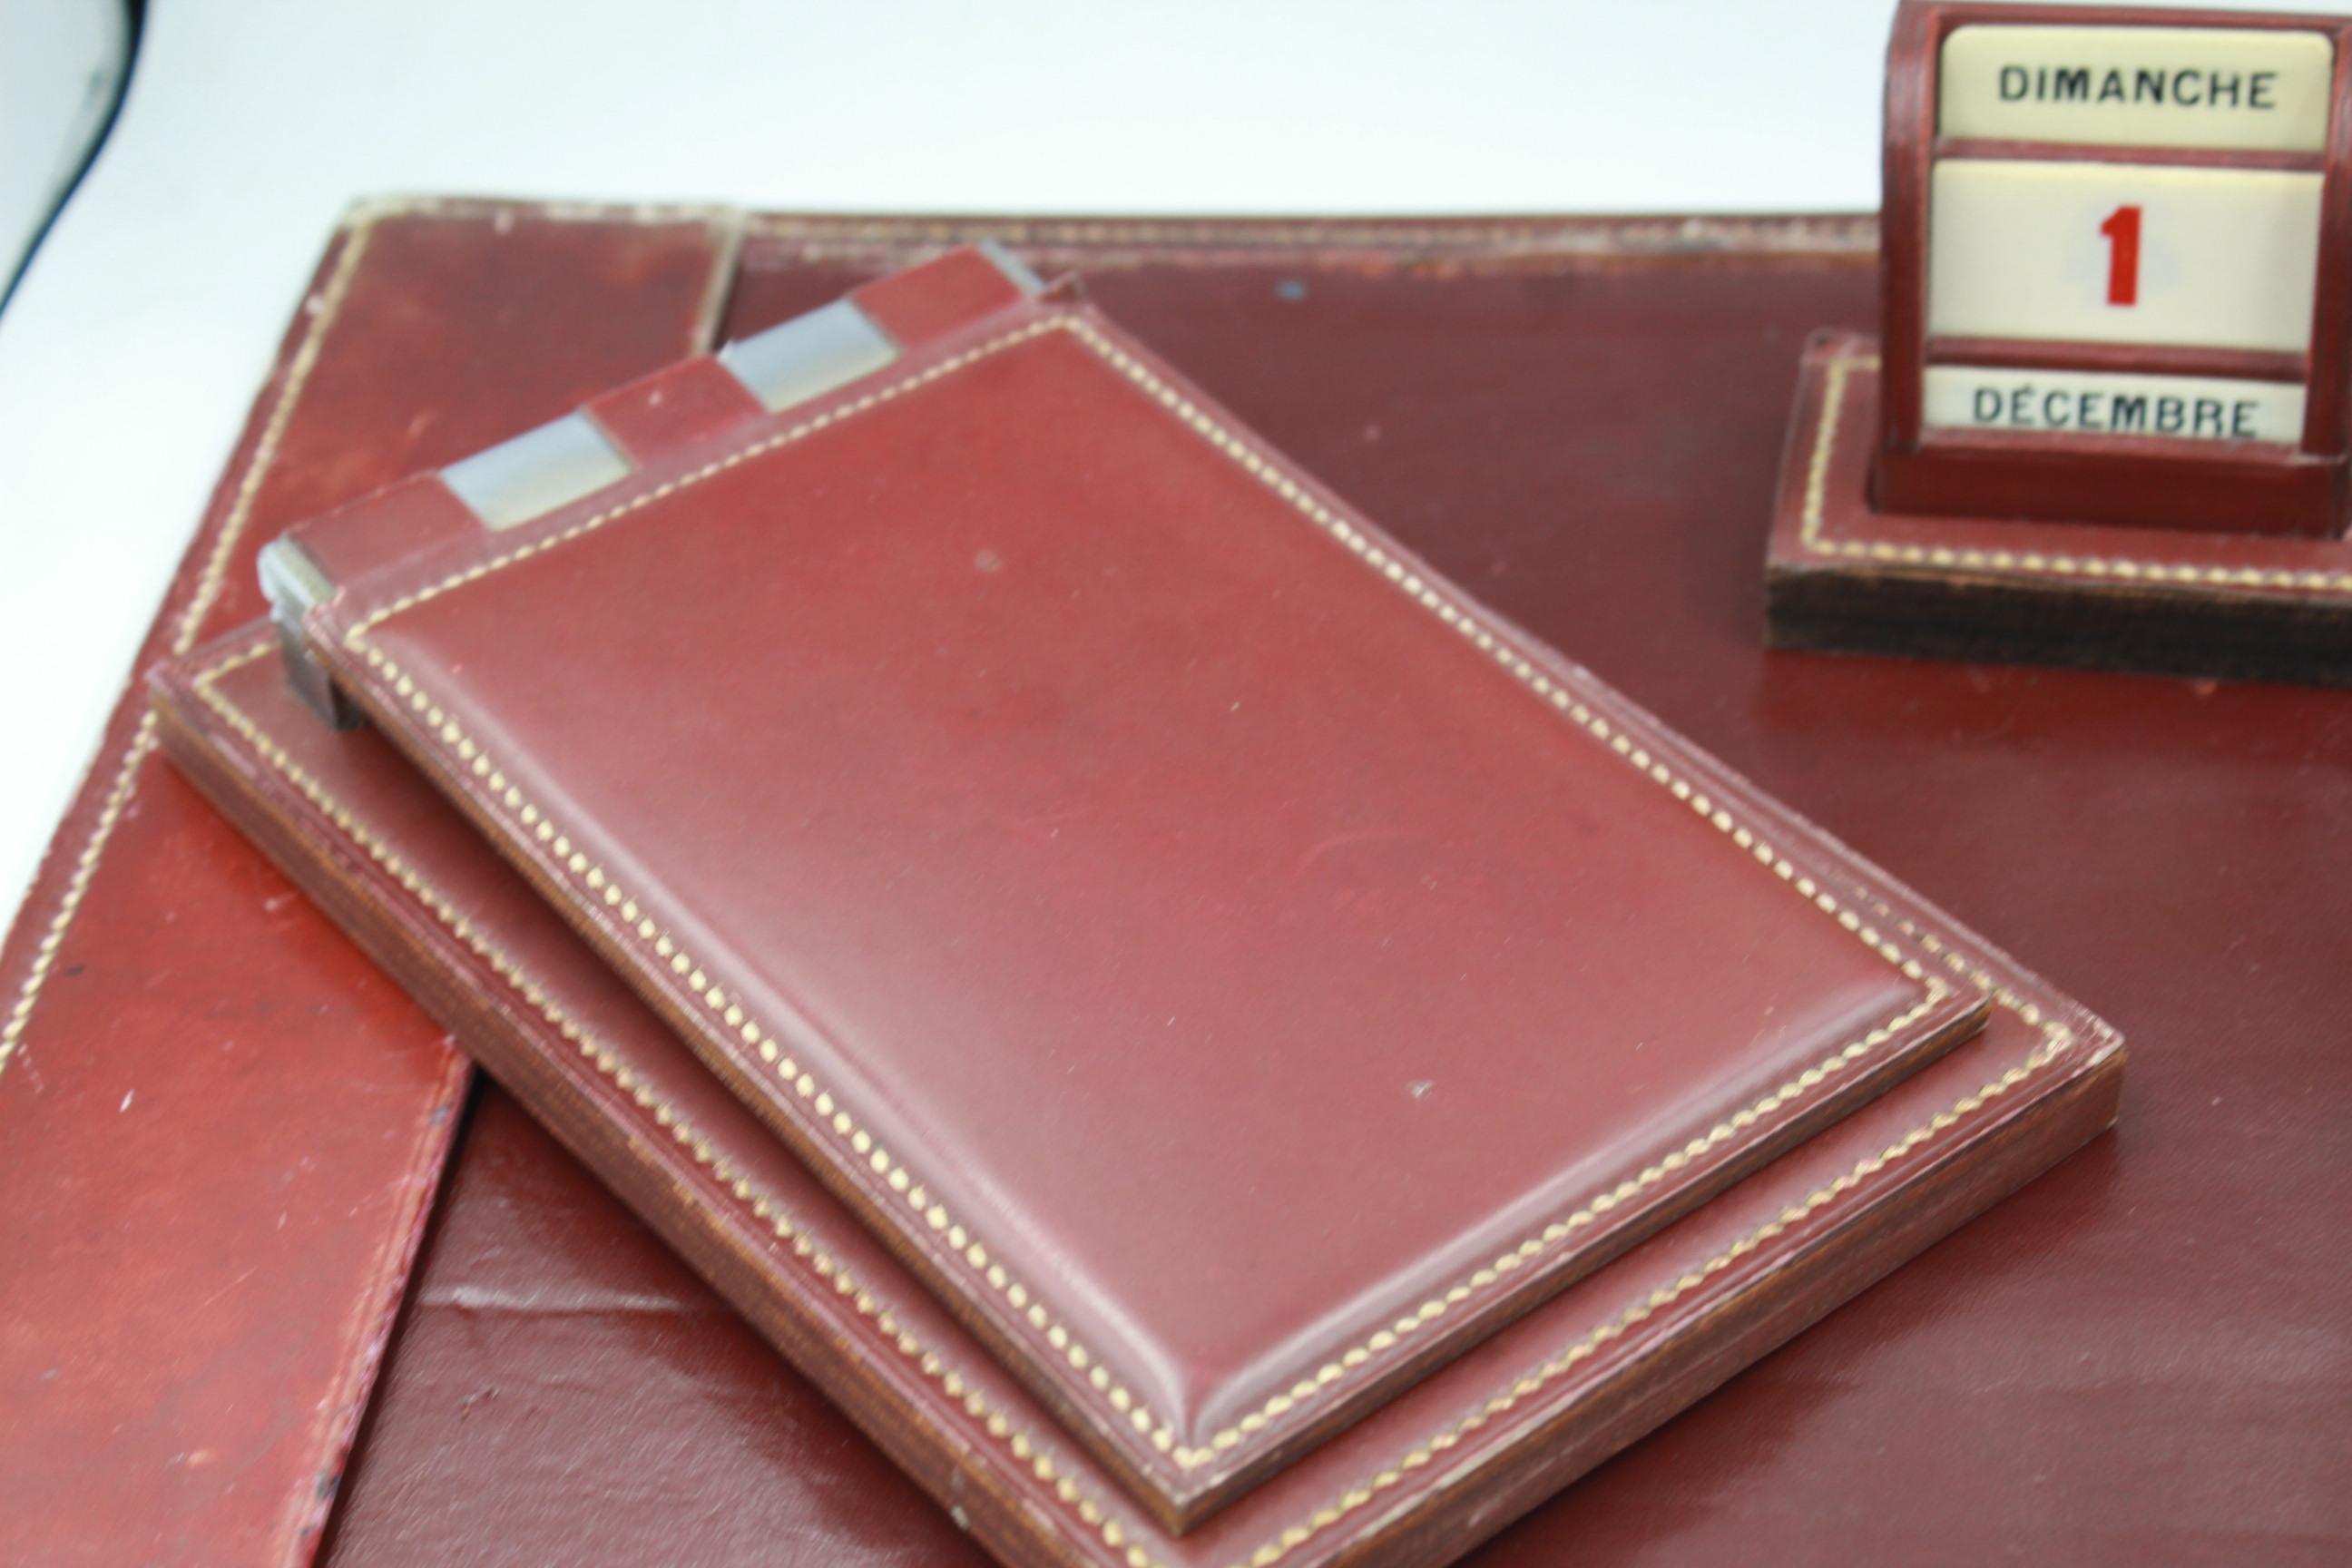 Hermes 50's/60's  4 pieces bureau set by Dupre-Lafon in Burgundy box leather. Relaly used but still a beautiful peice.
The calenda is missing some cards. 
Many signs of wear thats why its low price. 